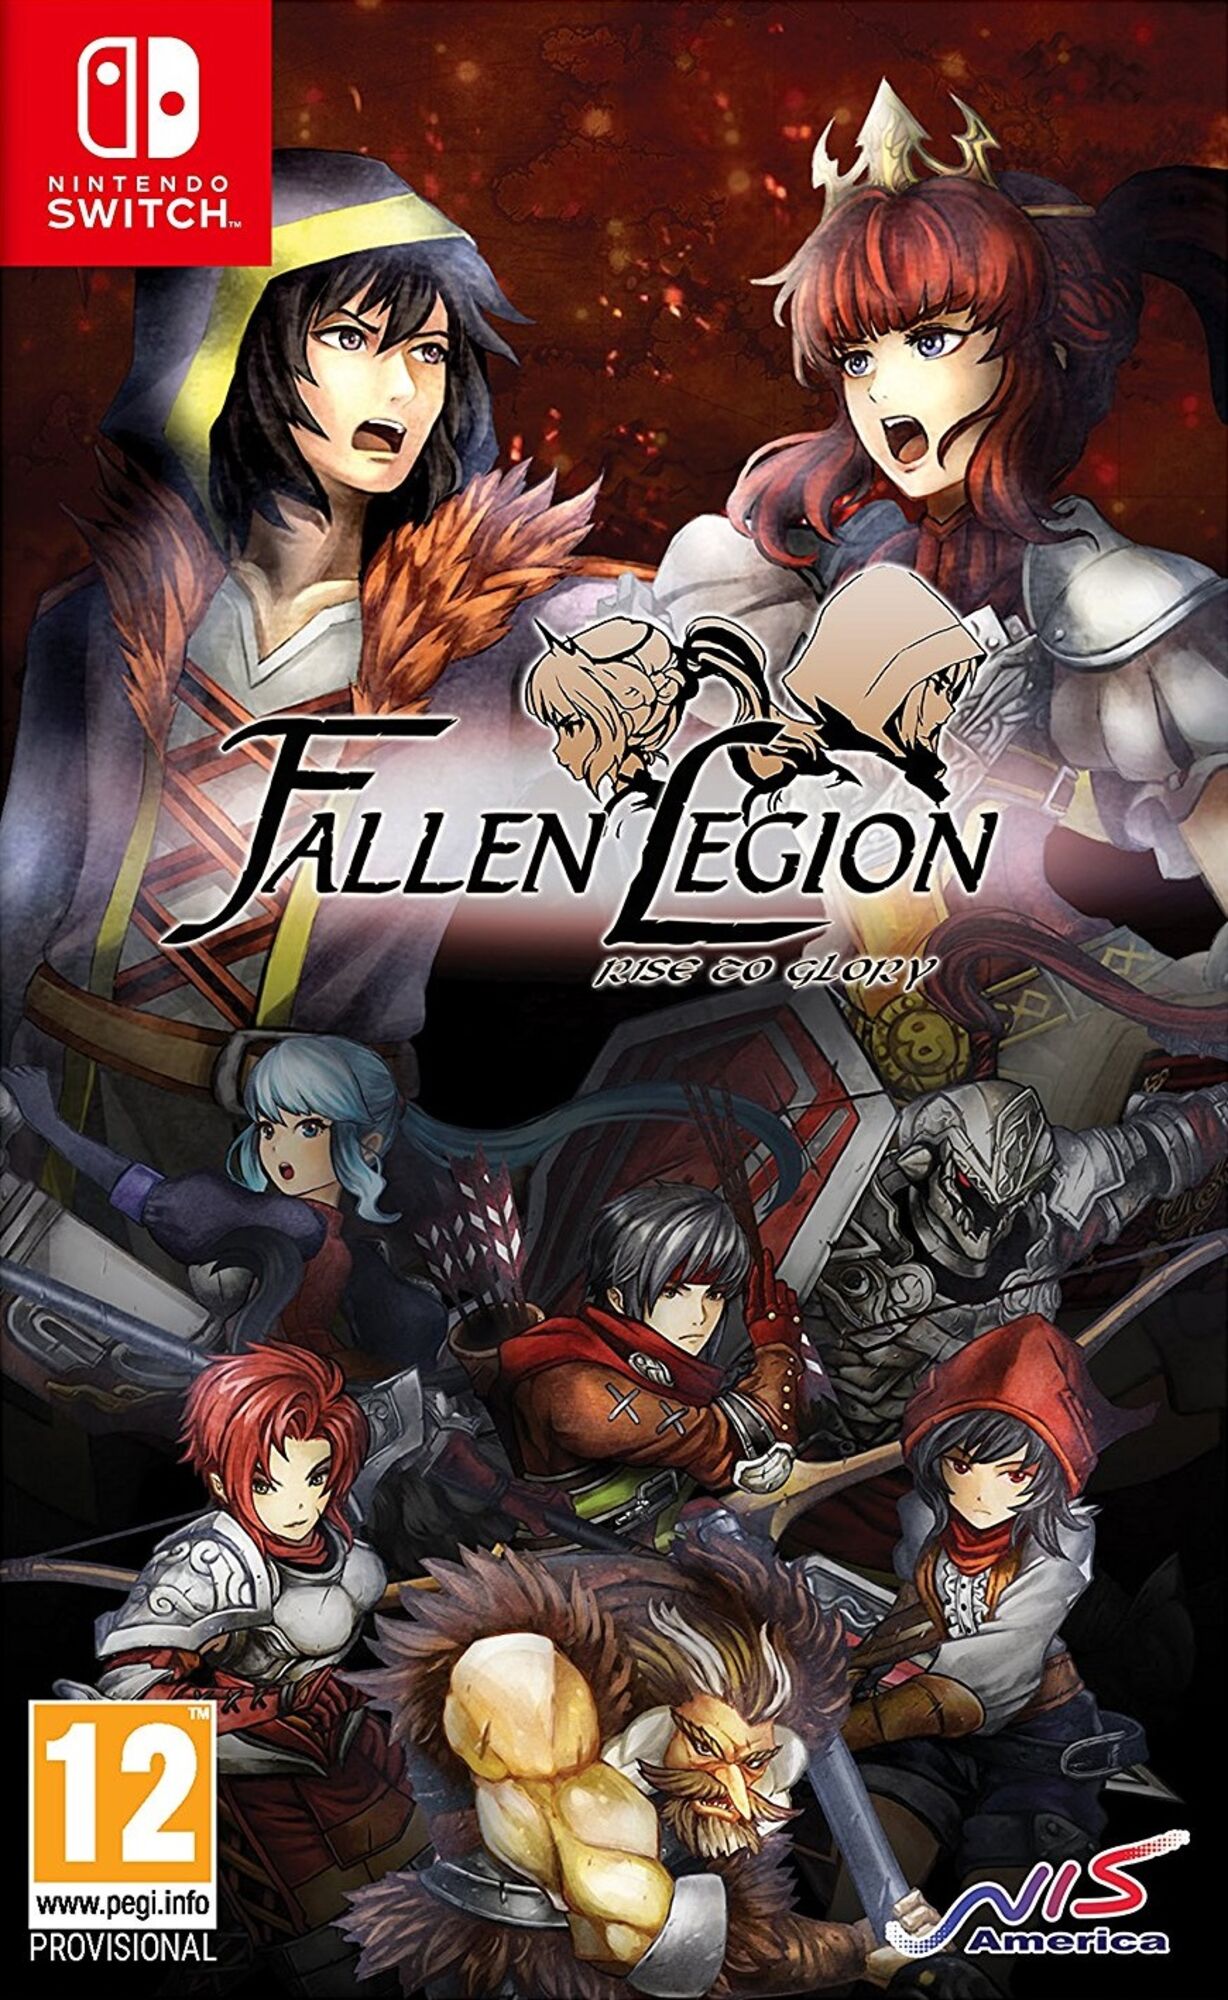 Fallen Legion: Rise to Glory download the last version for windows